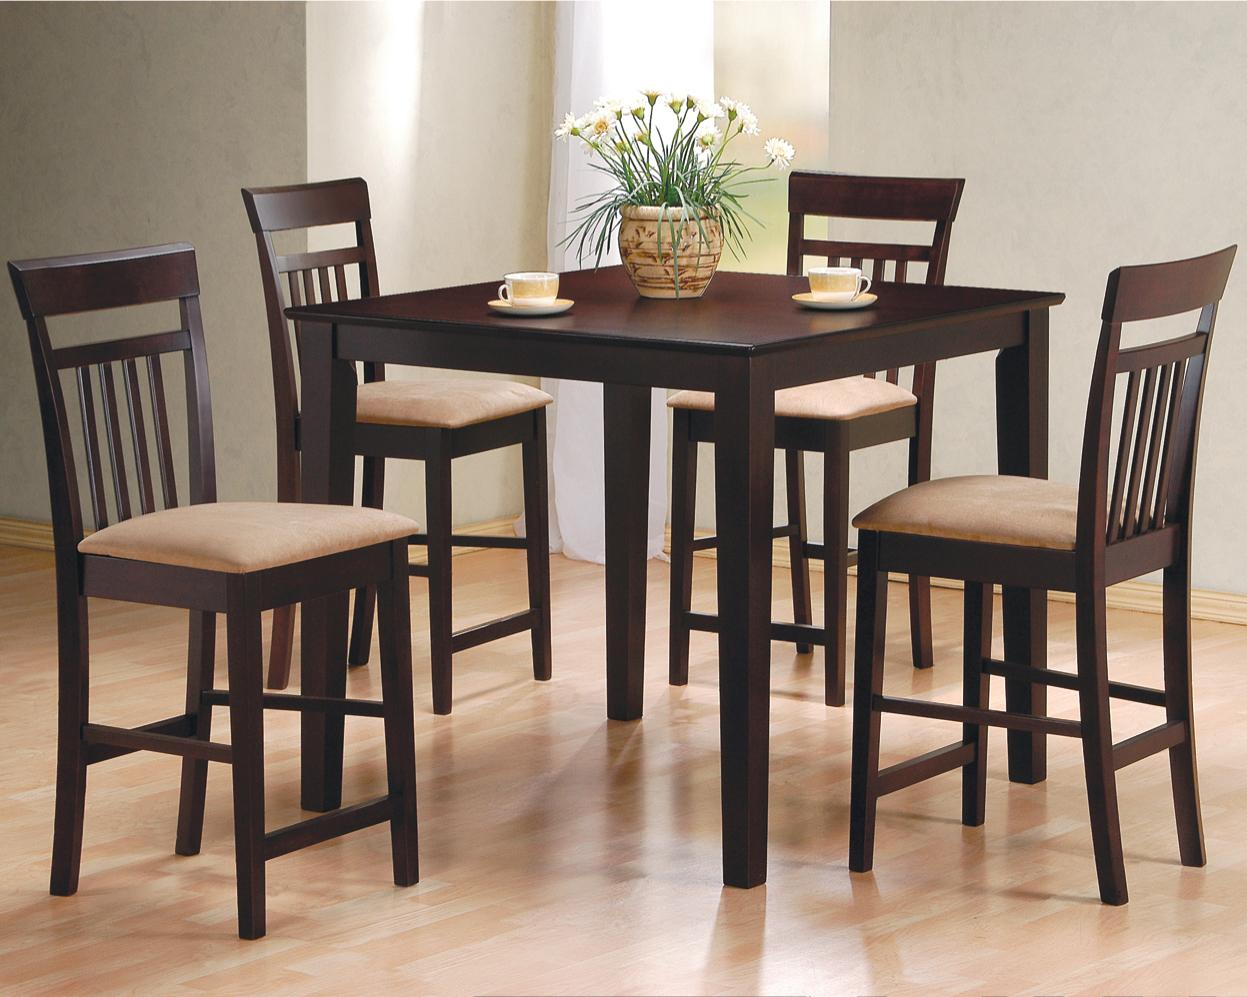 Dining Room Tables With Matching Bar Stools